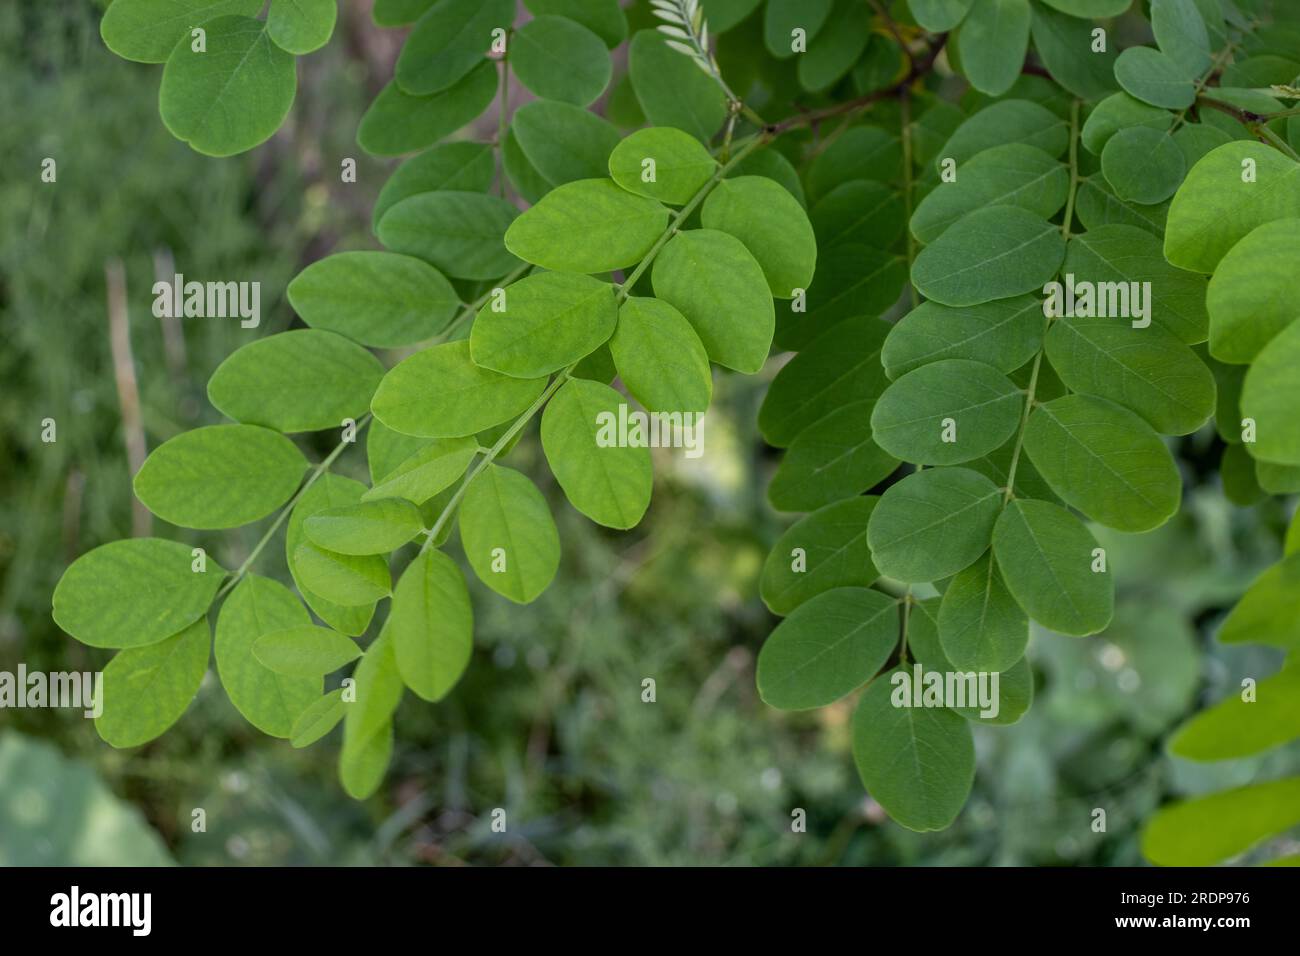 Close-up image of a branch of a tree with green leaves arranged in an alternate pattern - blurred background consisting of green foliage taken during Stock Photo